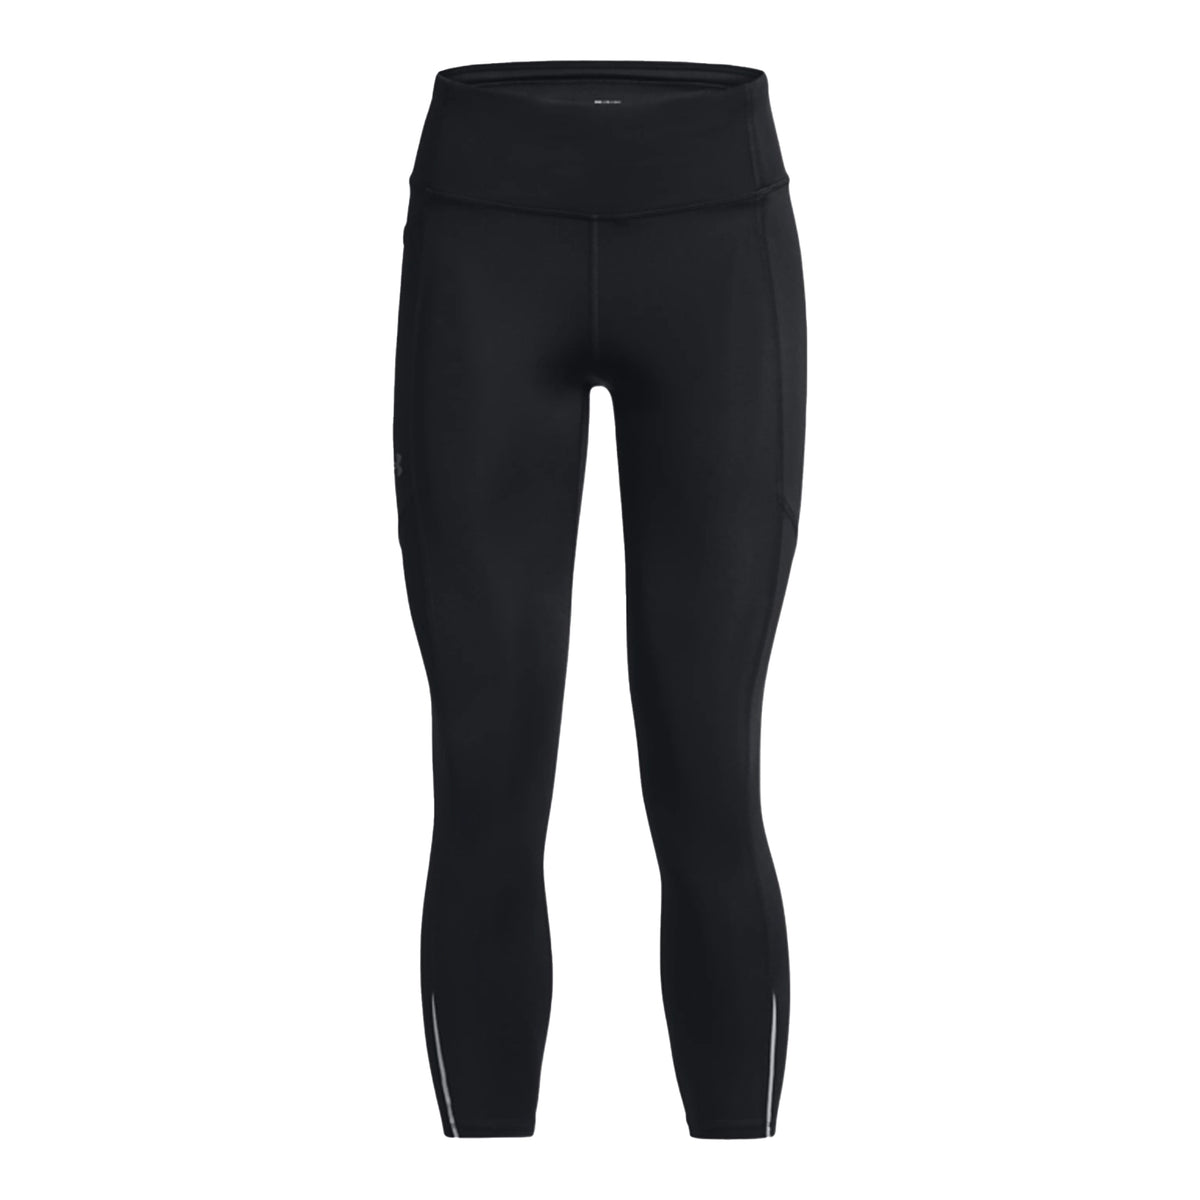 Under Armour Womens Fly Fast 3.0 Ankle Tights: Black/Reflective